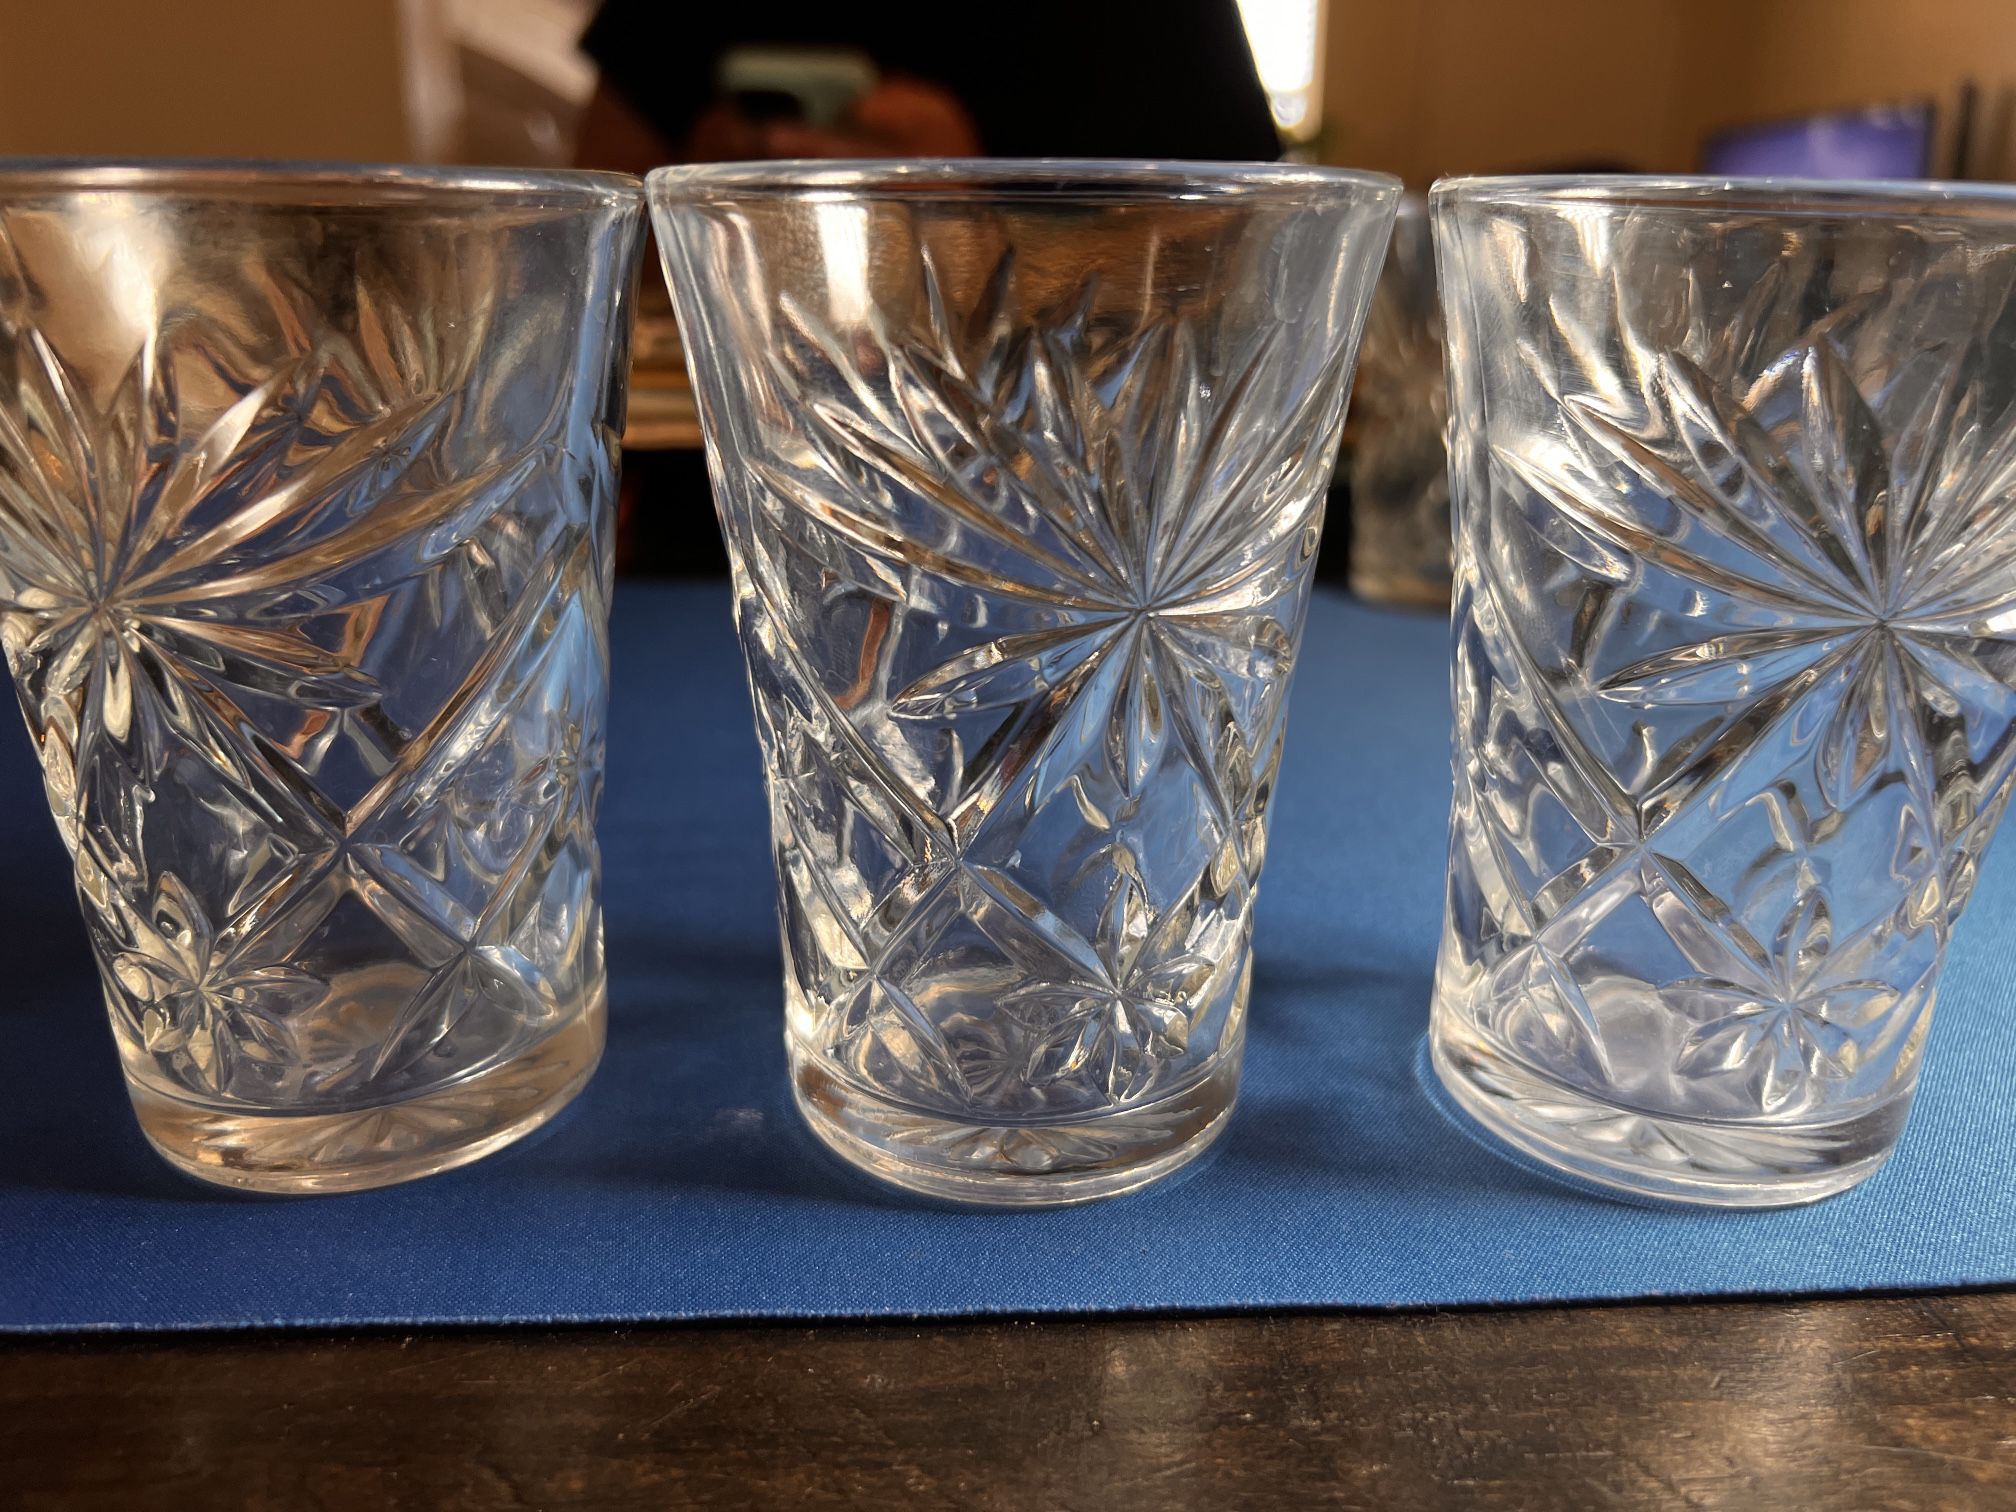  Vintage Anchor Hocking EAPC Early American PRESCUT Juice Glasses